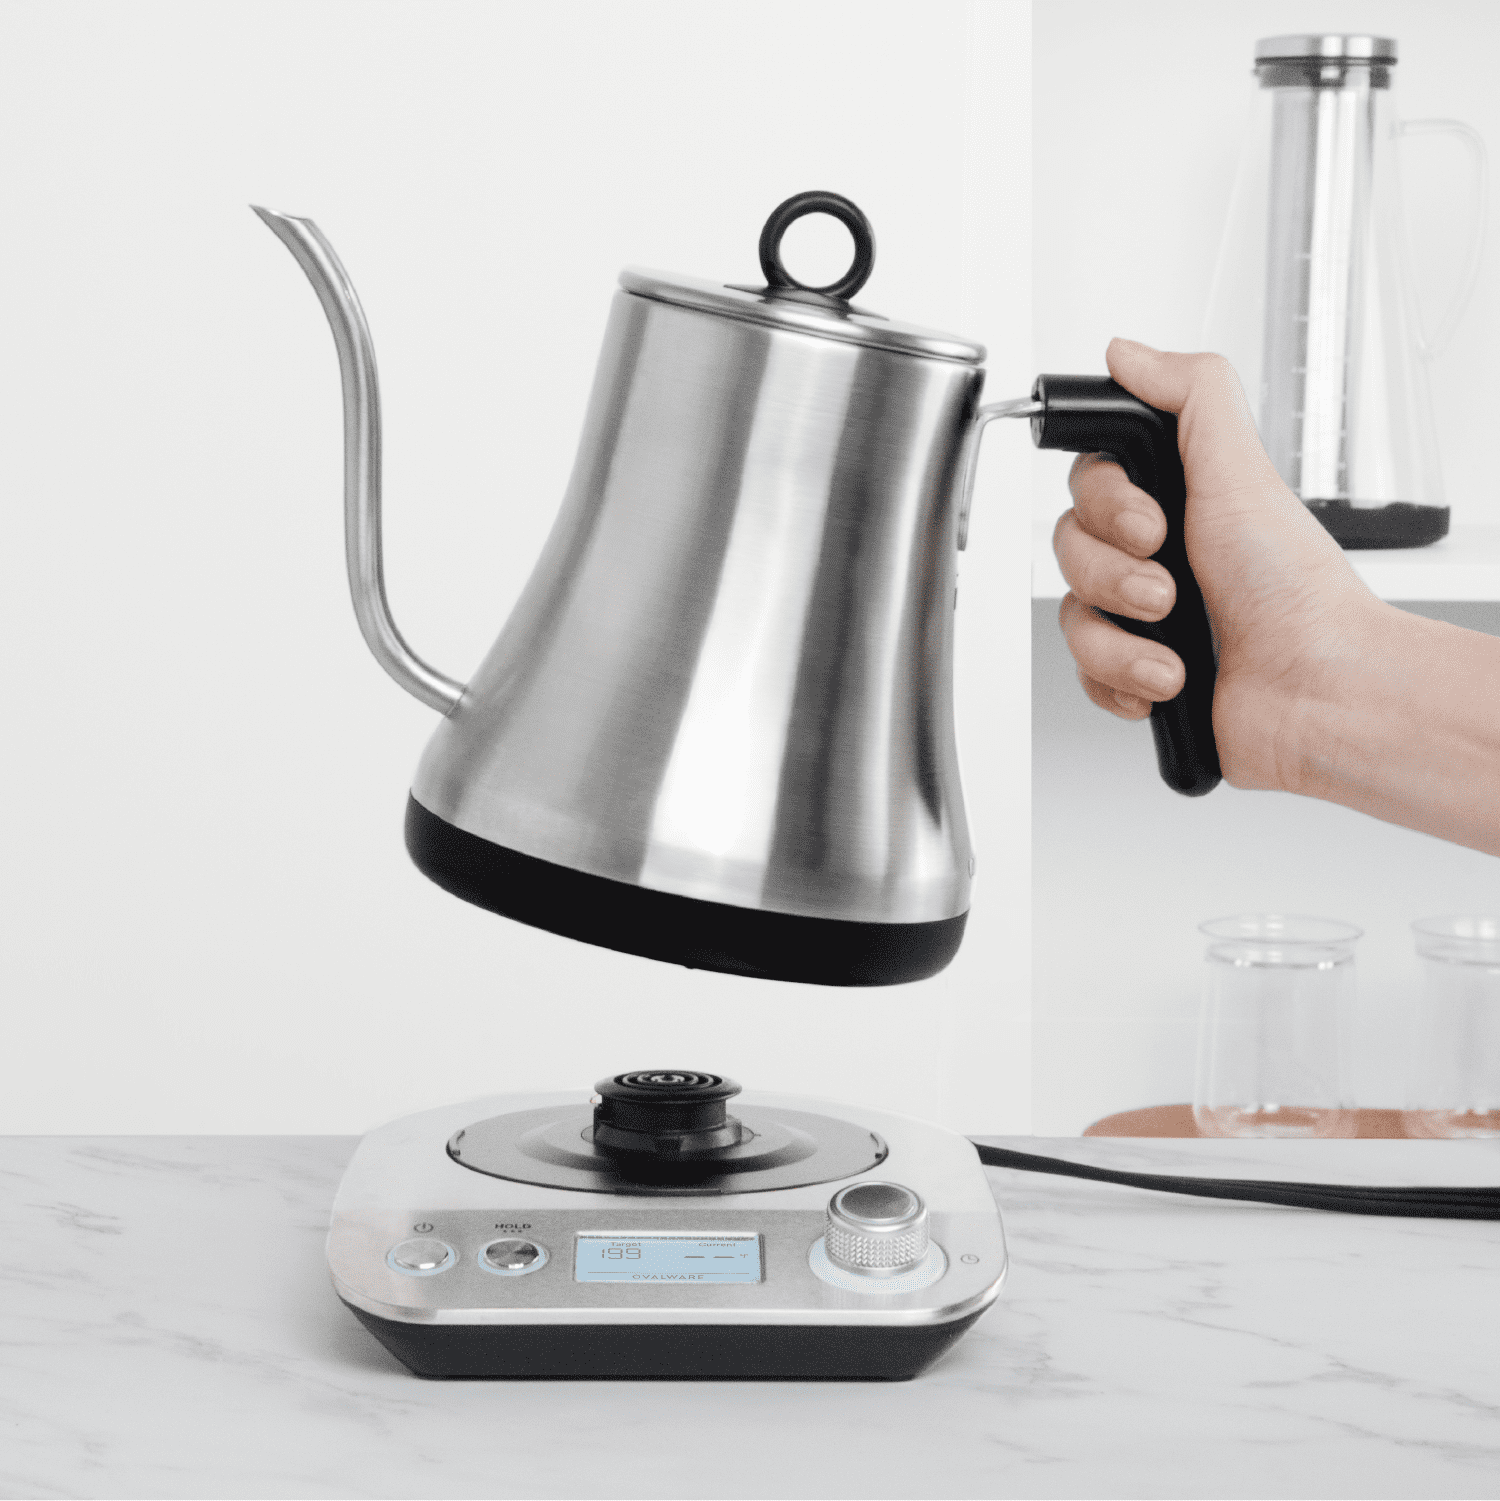 Electric Pour Over Kettle from Ovalware (Matte Black) – JB Peel Coffee